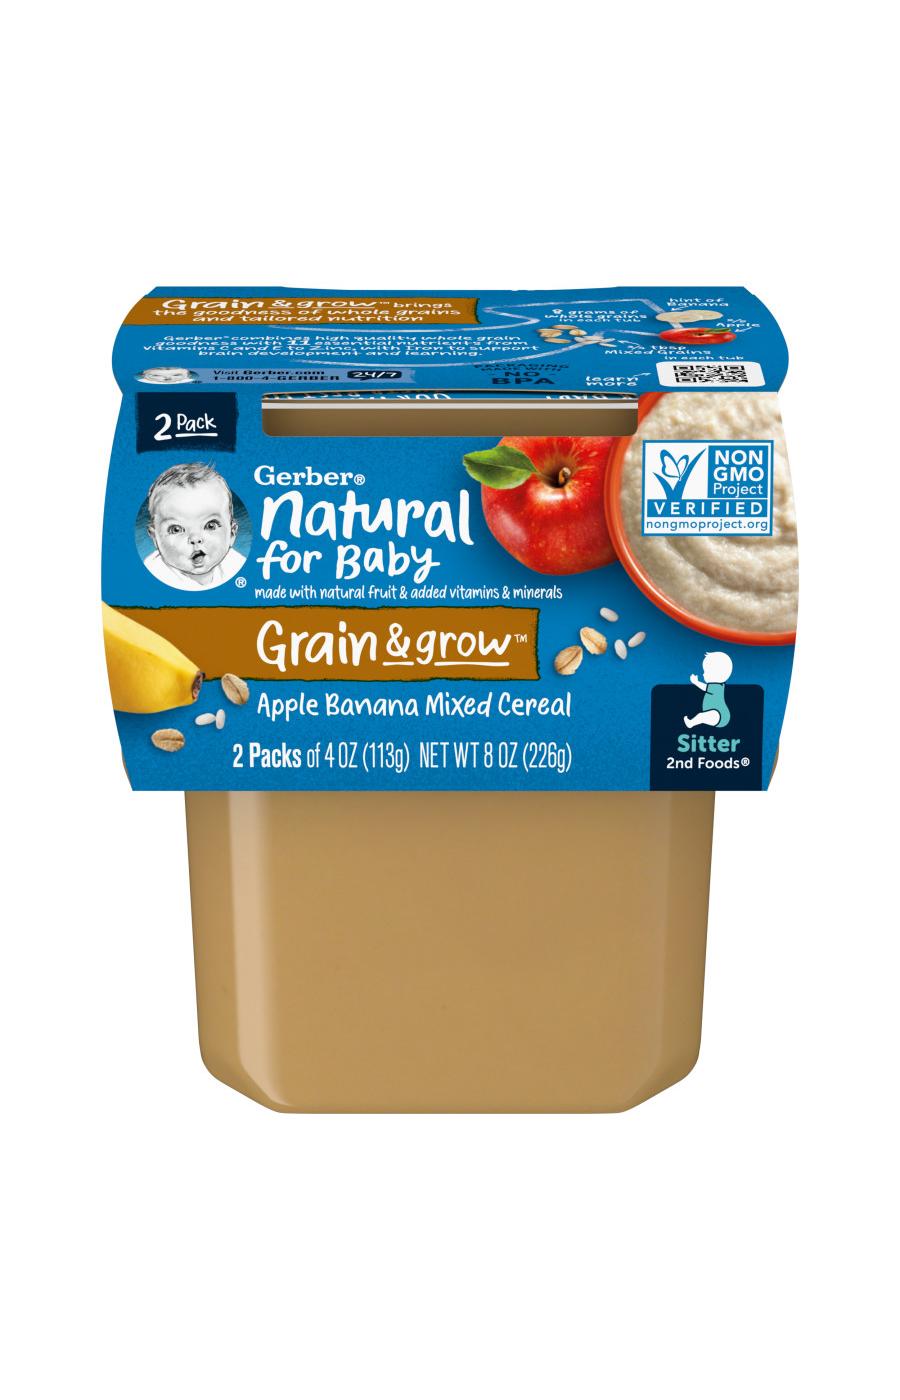 Gerber Natural for Baby Grain & Grow 2nd Foods - Apple Banana Mixed Cereal; image 1 of 8